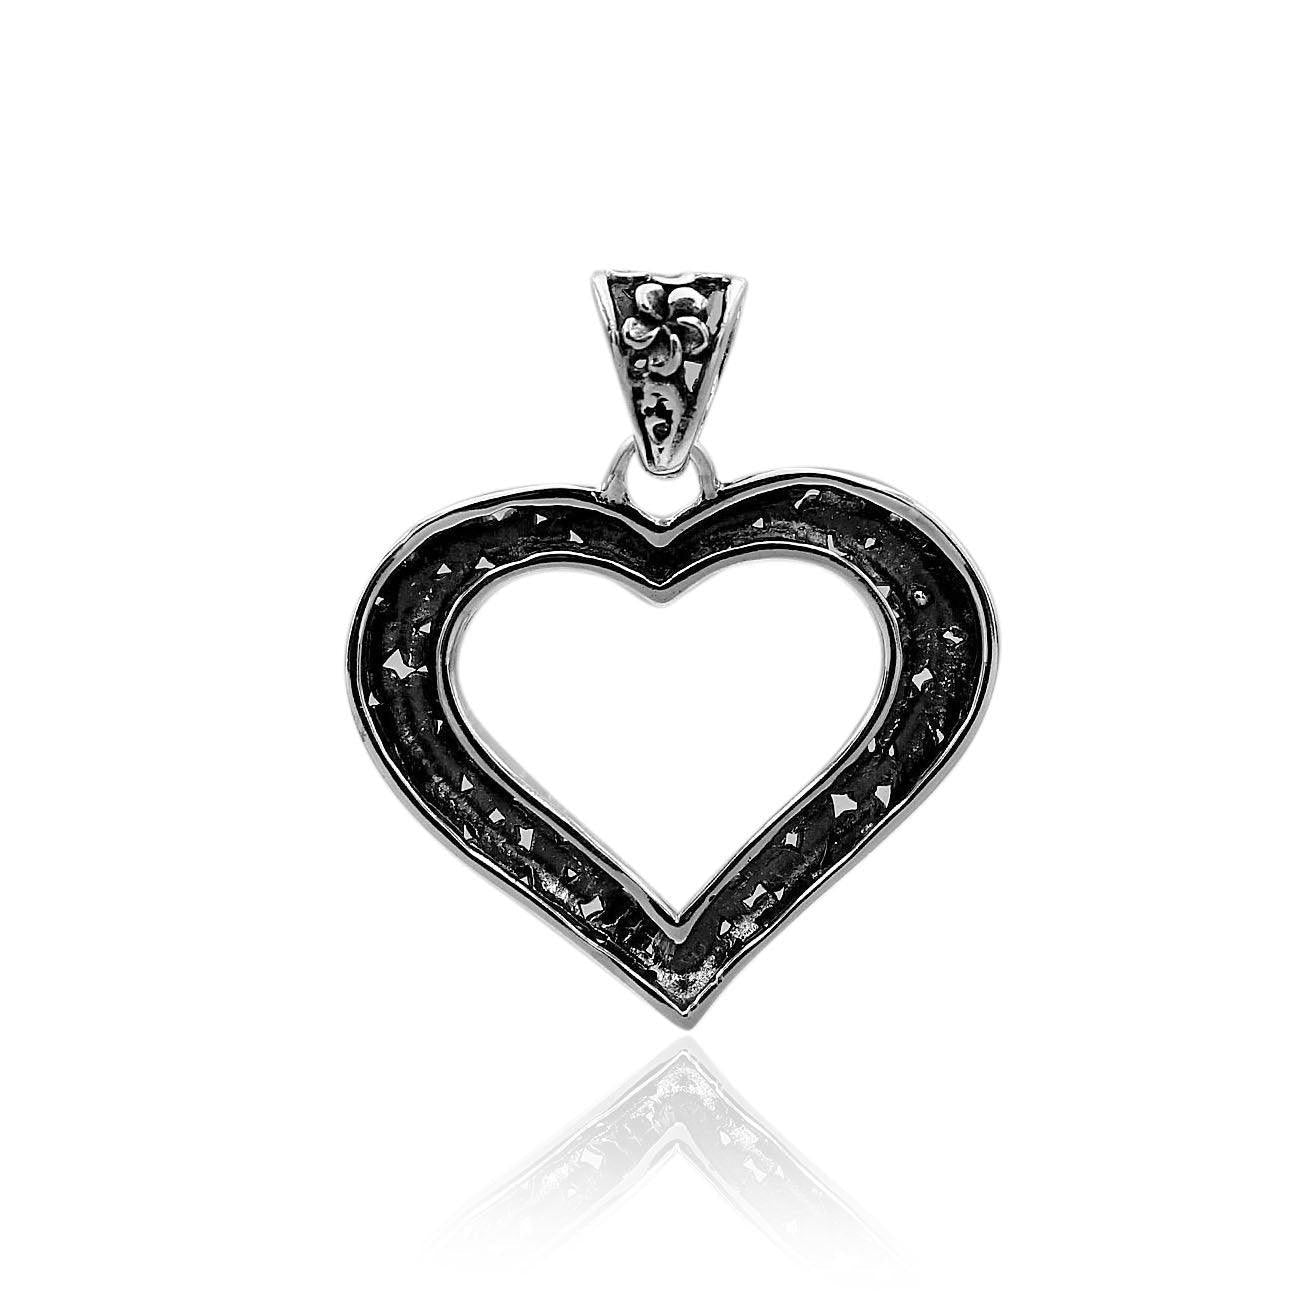 Handmade Frangipani Floral HEART Charm Pendant Necklace in 925 Sterling Silver With Chain - 3.8 Cm - Inspiring Jewellery